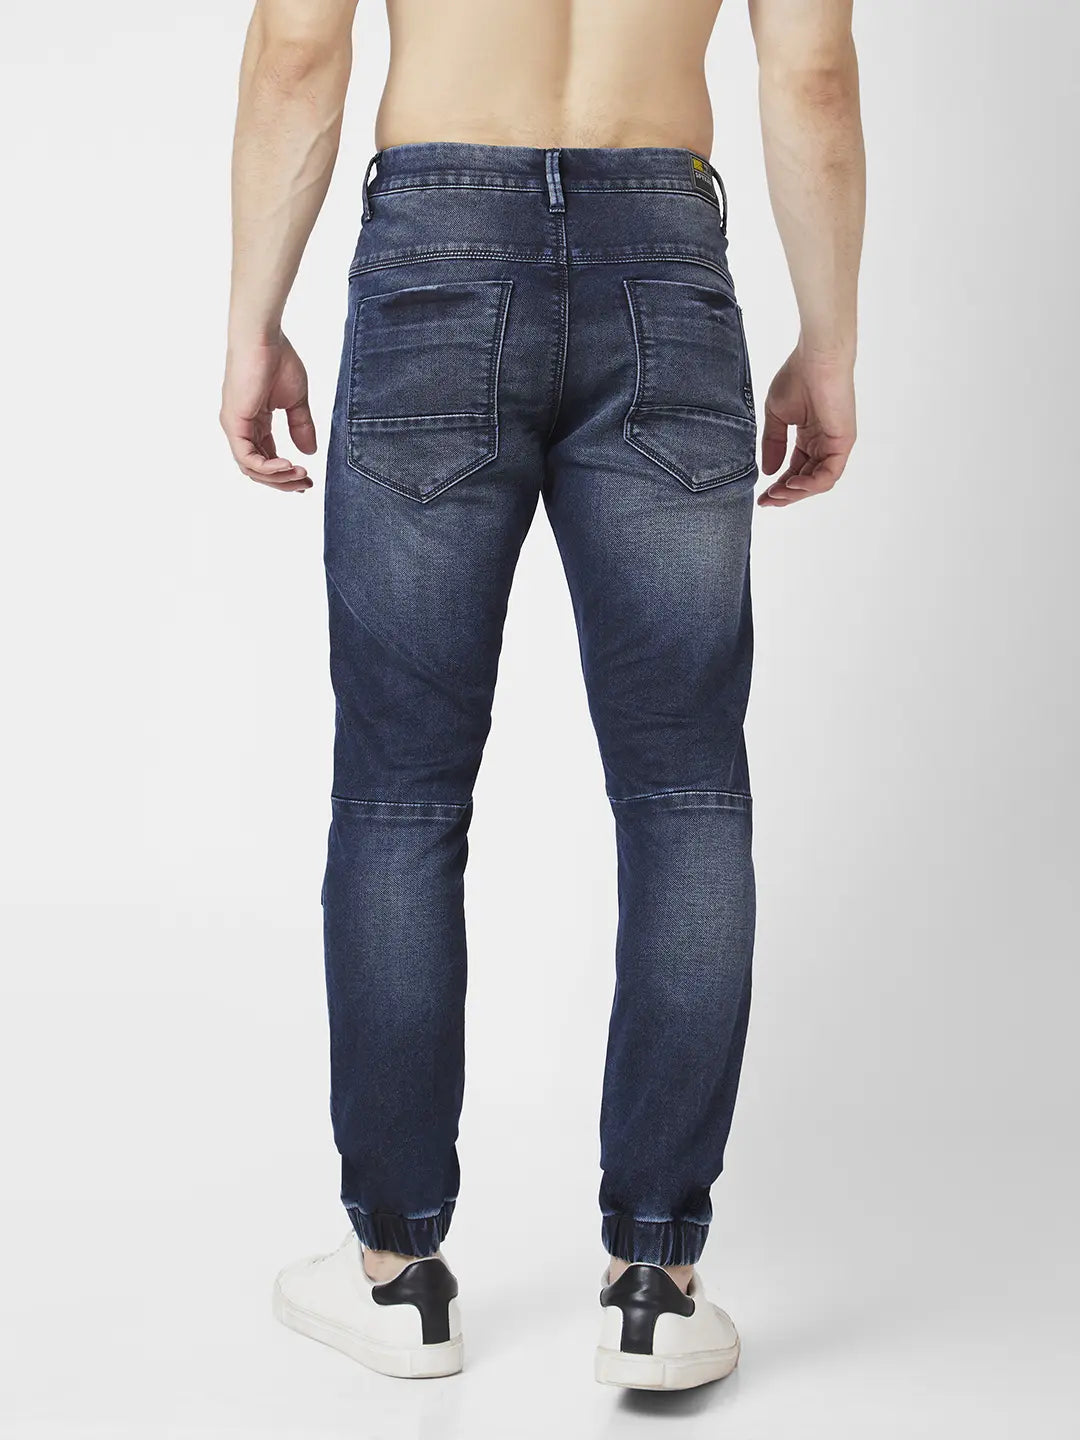 Aggregate more than 60 spykar jeans online latest